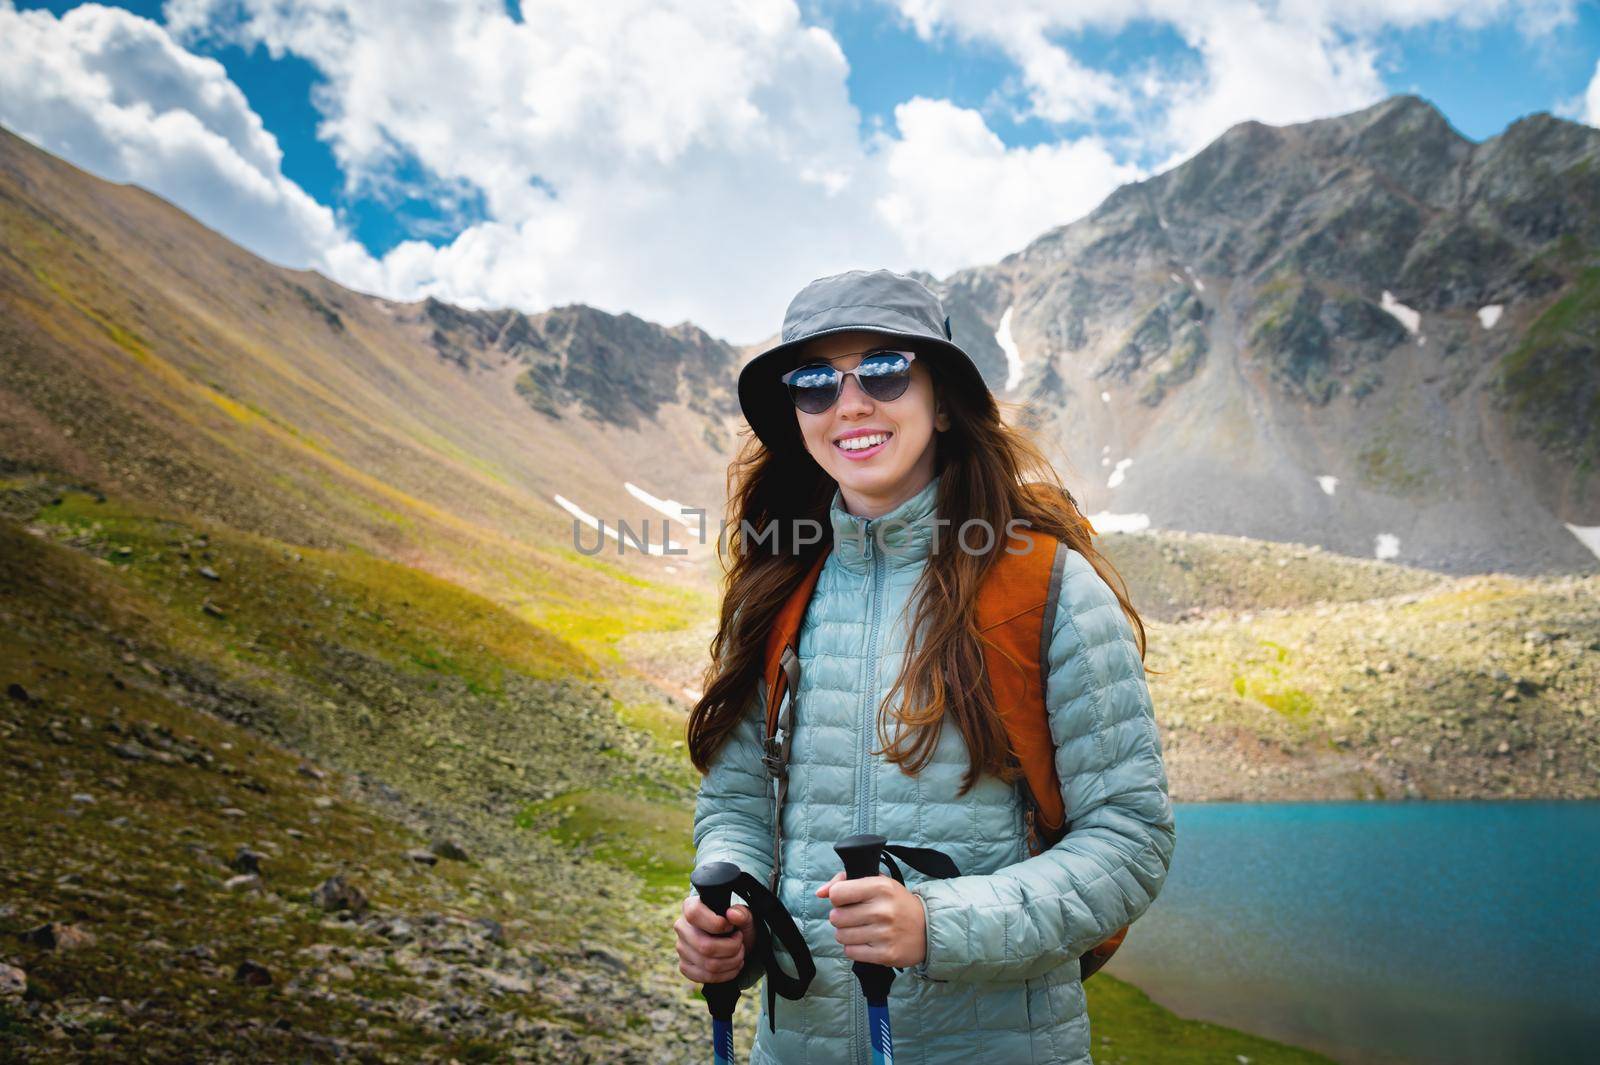 Smiling, positive girl with disheveled hair against the background of a blue mountain lake, with trekking poles in her hands and a backpack, a tourist on a hike.